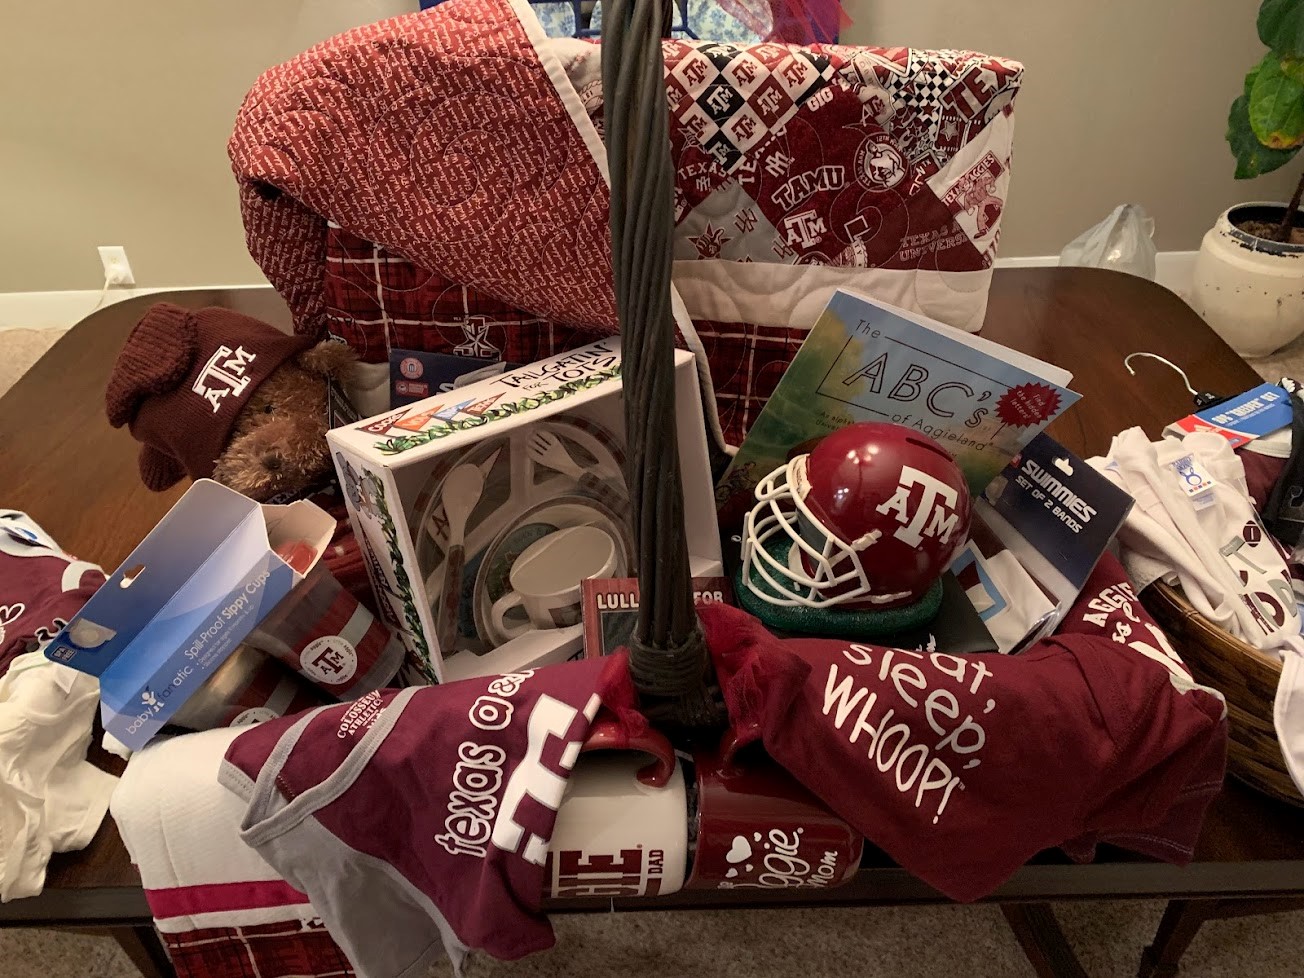 Aggie Baby Basket Raffle Ticket - 5 for $20